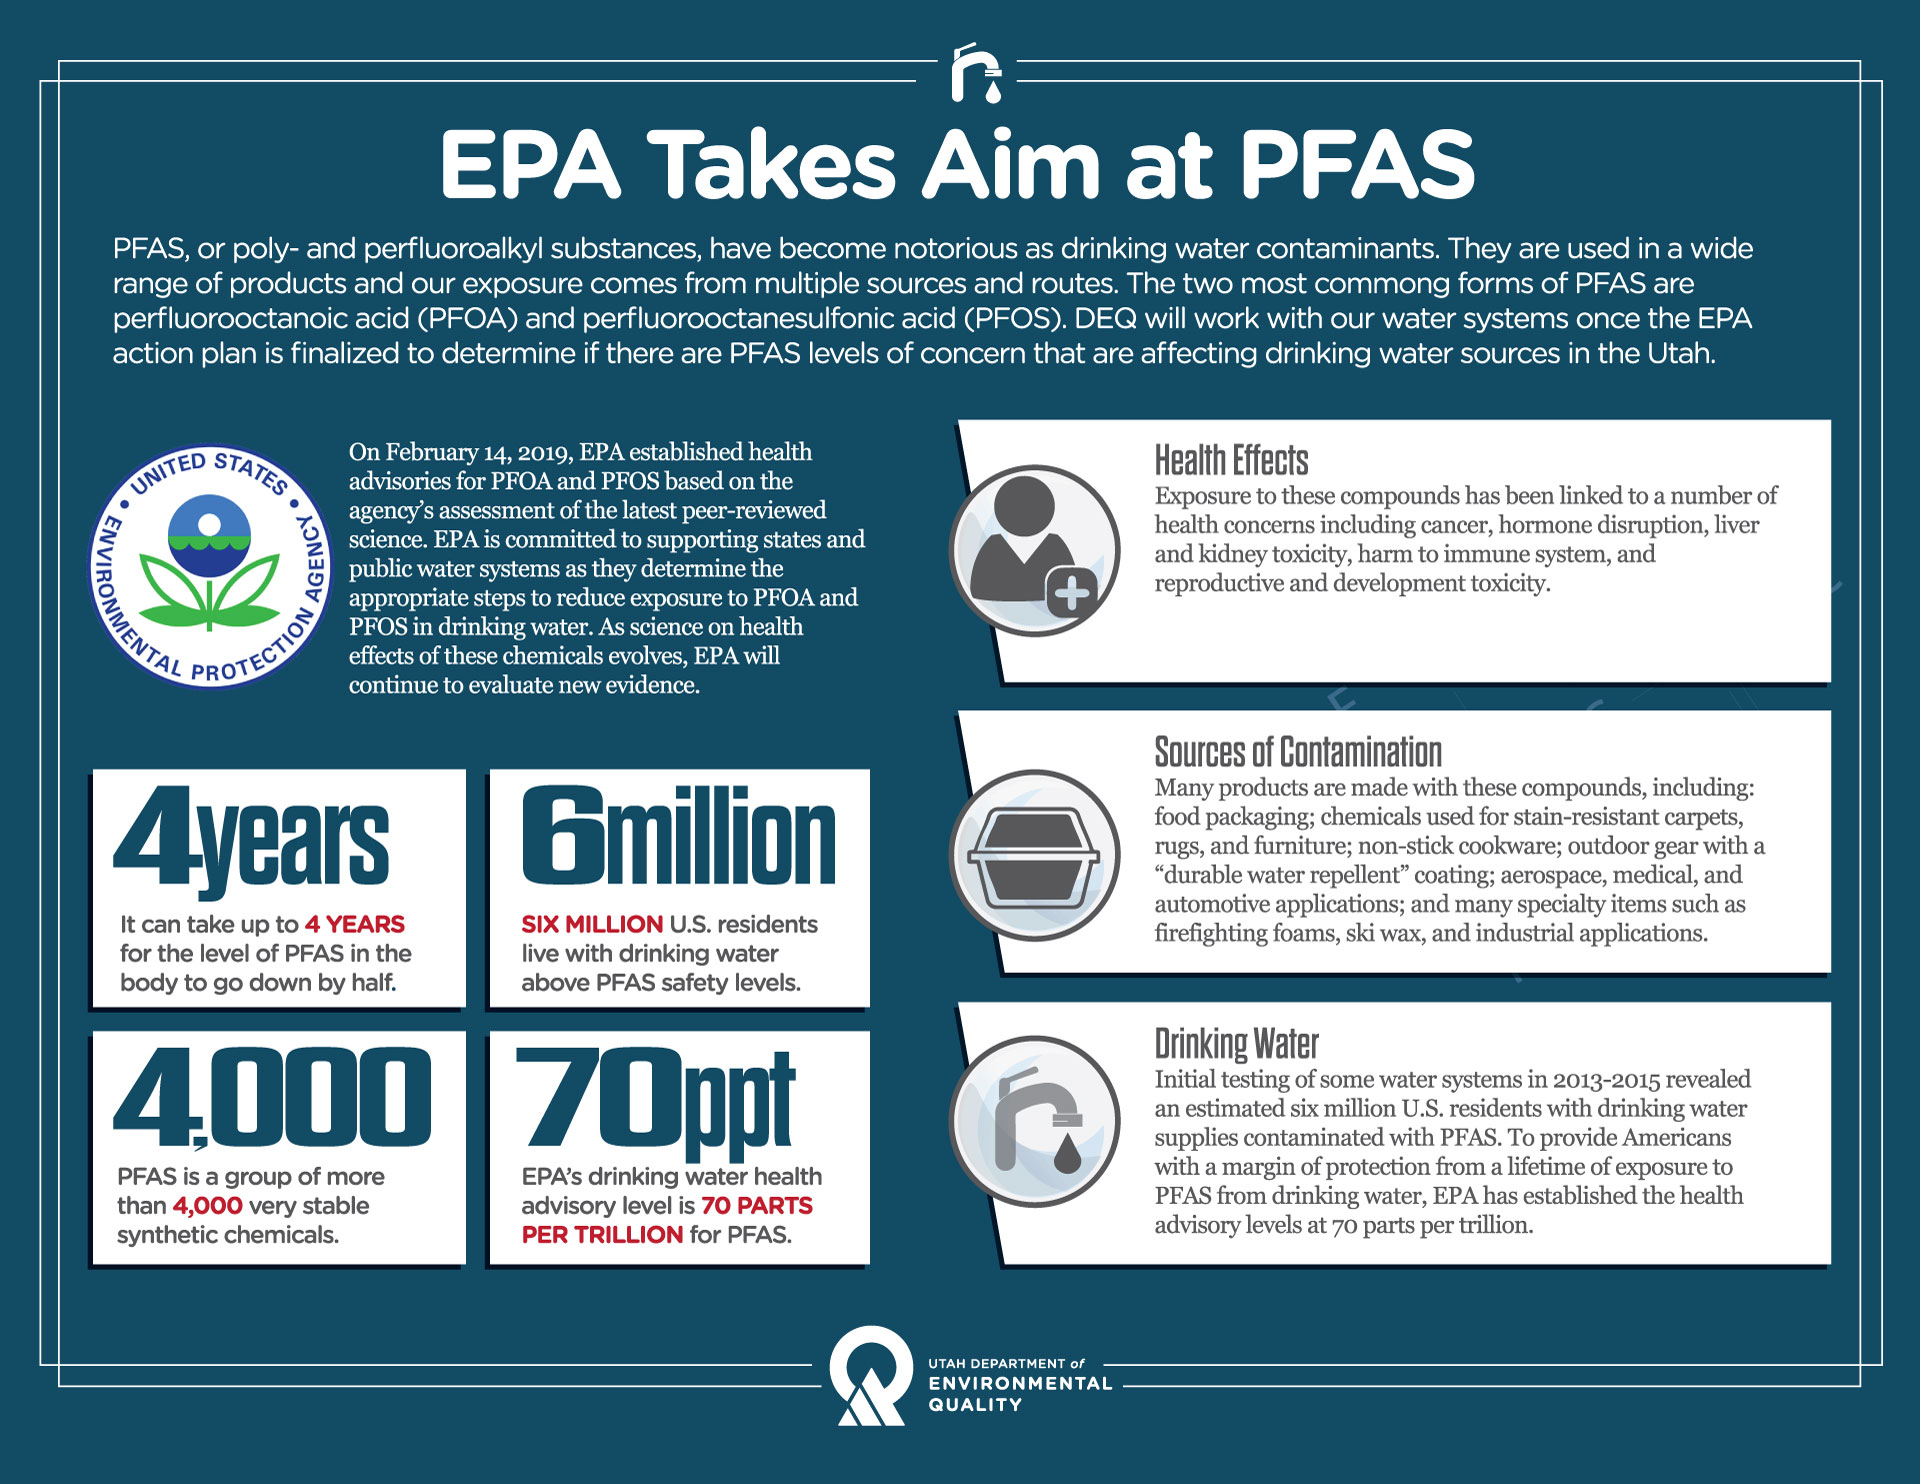 Graphic containing text conveying information about PFAS